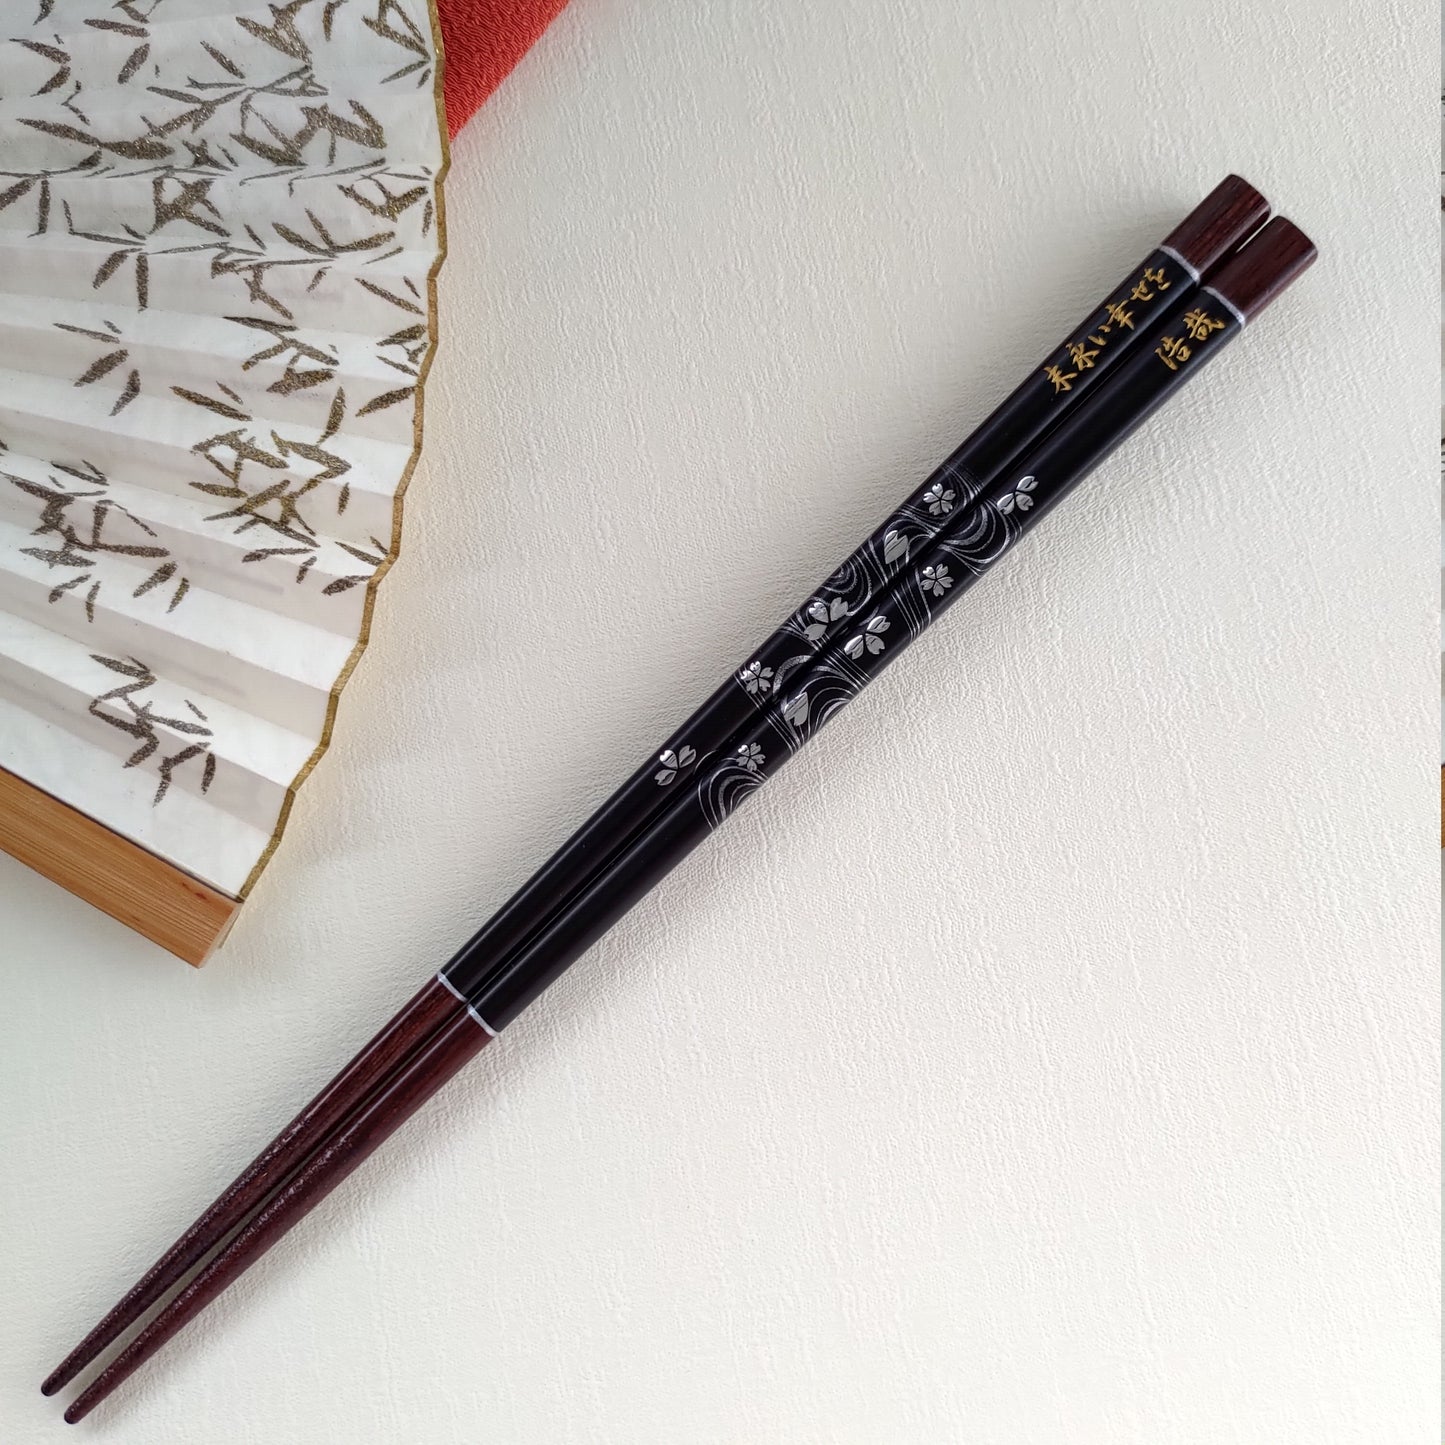 Elegant Japanese chopsticks with cherry blossoms on river stream black red - SINGLE PAIR WITH ENGRAVED WOODEN BOX SET